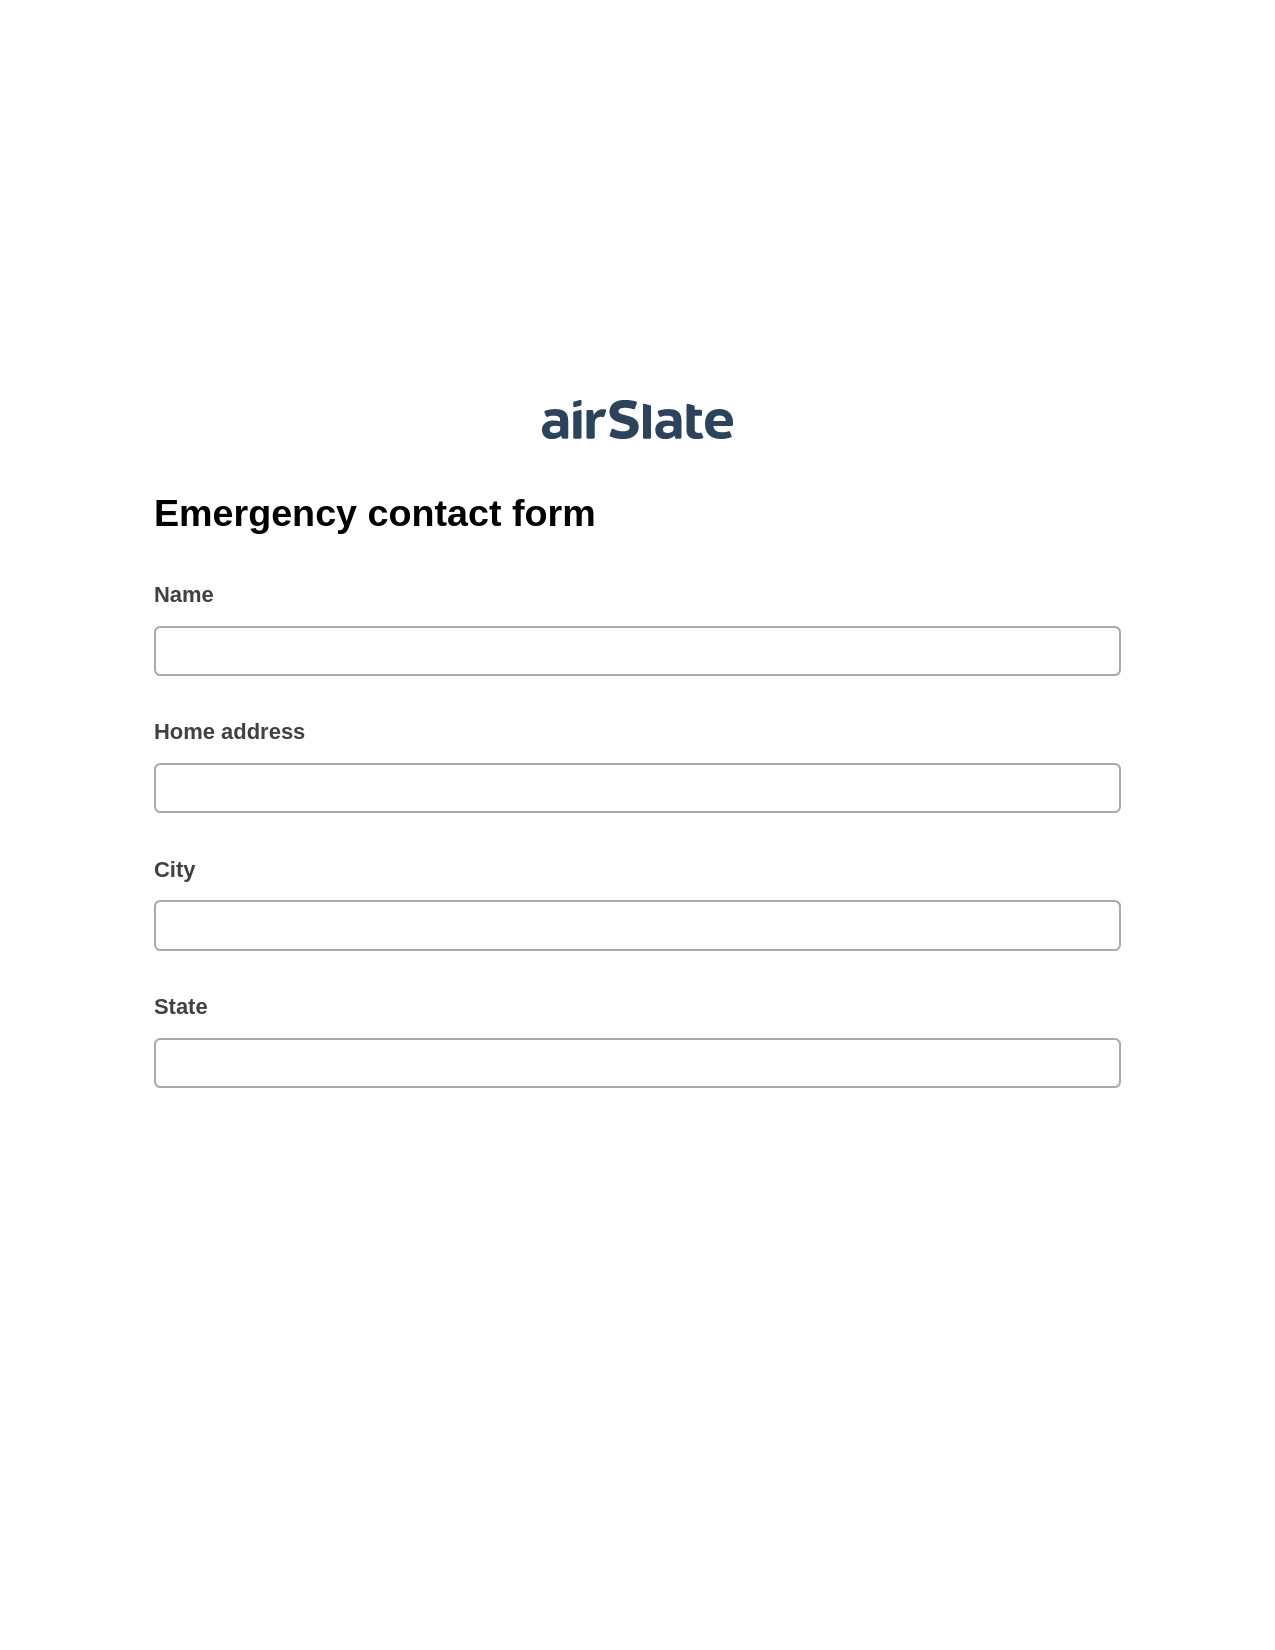 Emergency contact form Pre-fill from Salesforce Record Bot, Mailchimp send Campaign bot, Slack Two-Way Binding Bot